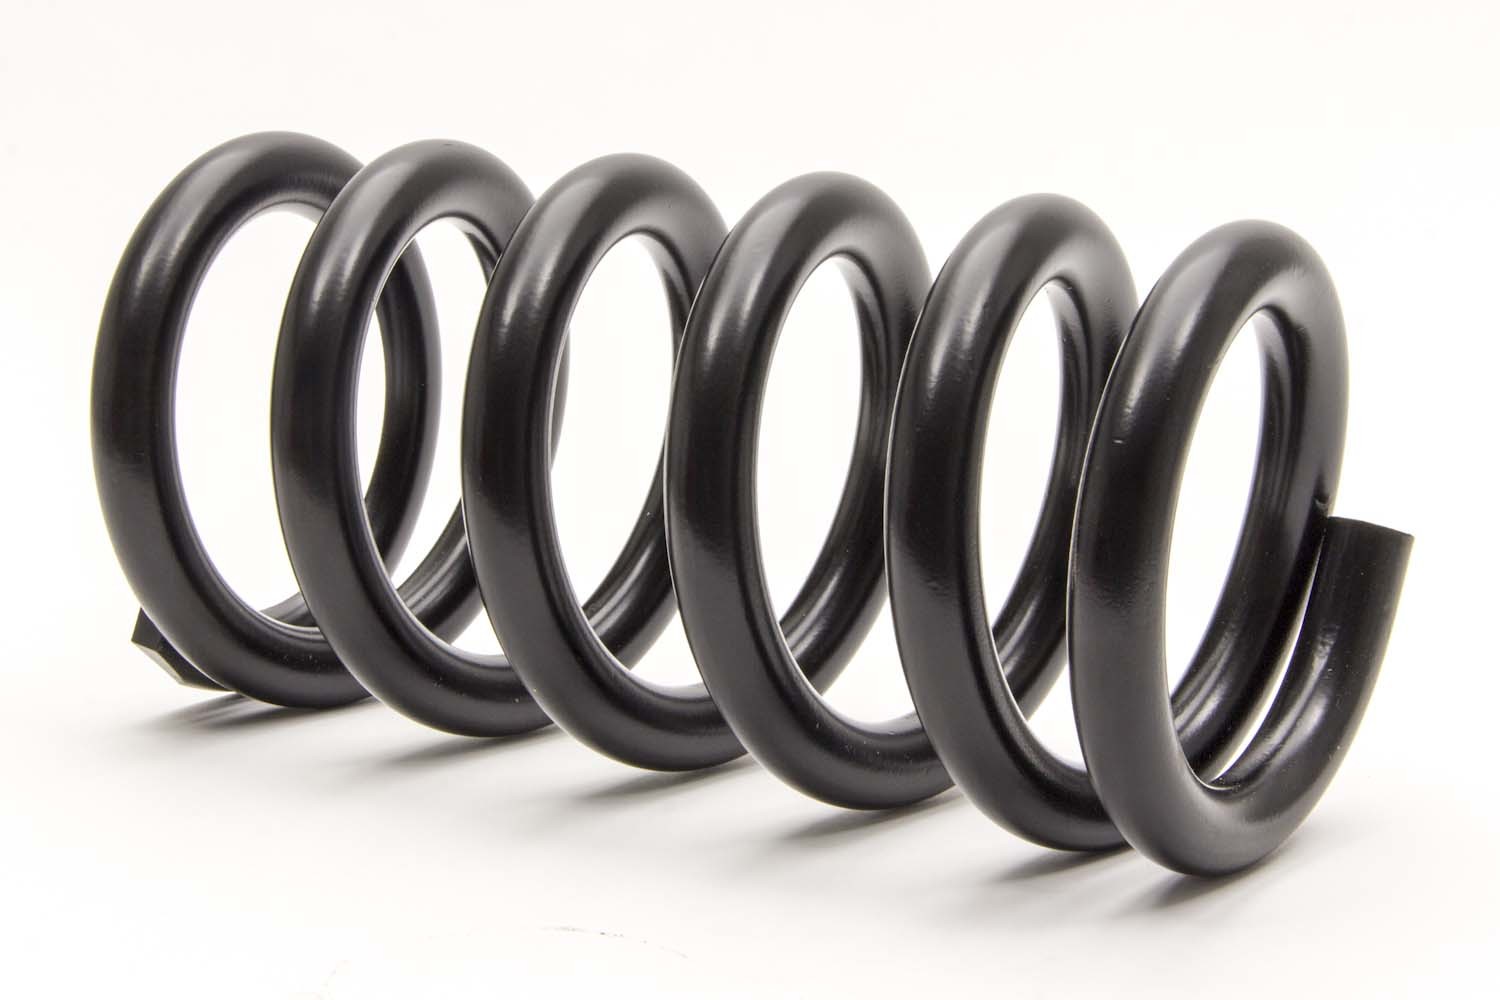 AFCO Racing Products 21000-6 Coil Spring, Conventional, 5.5 in OD, 11.000 in Length, 1000 lb/in Spring Rate, Front, Stock Appearing, Steel, Black Powder Coat, Each